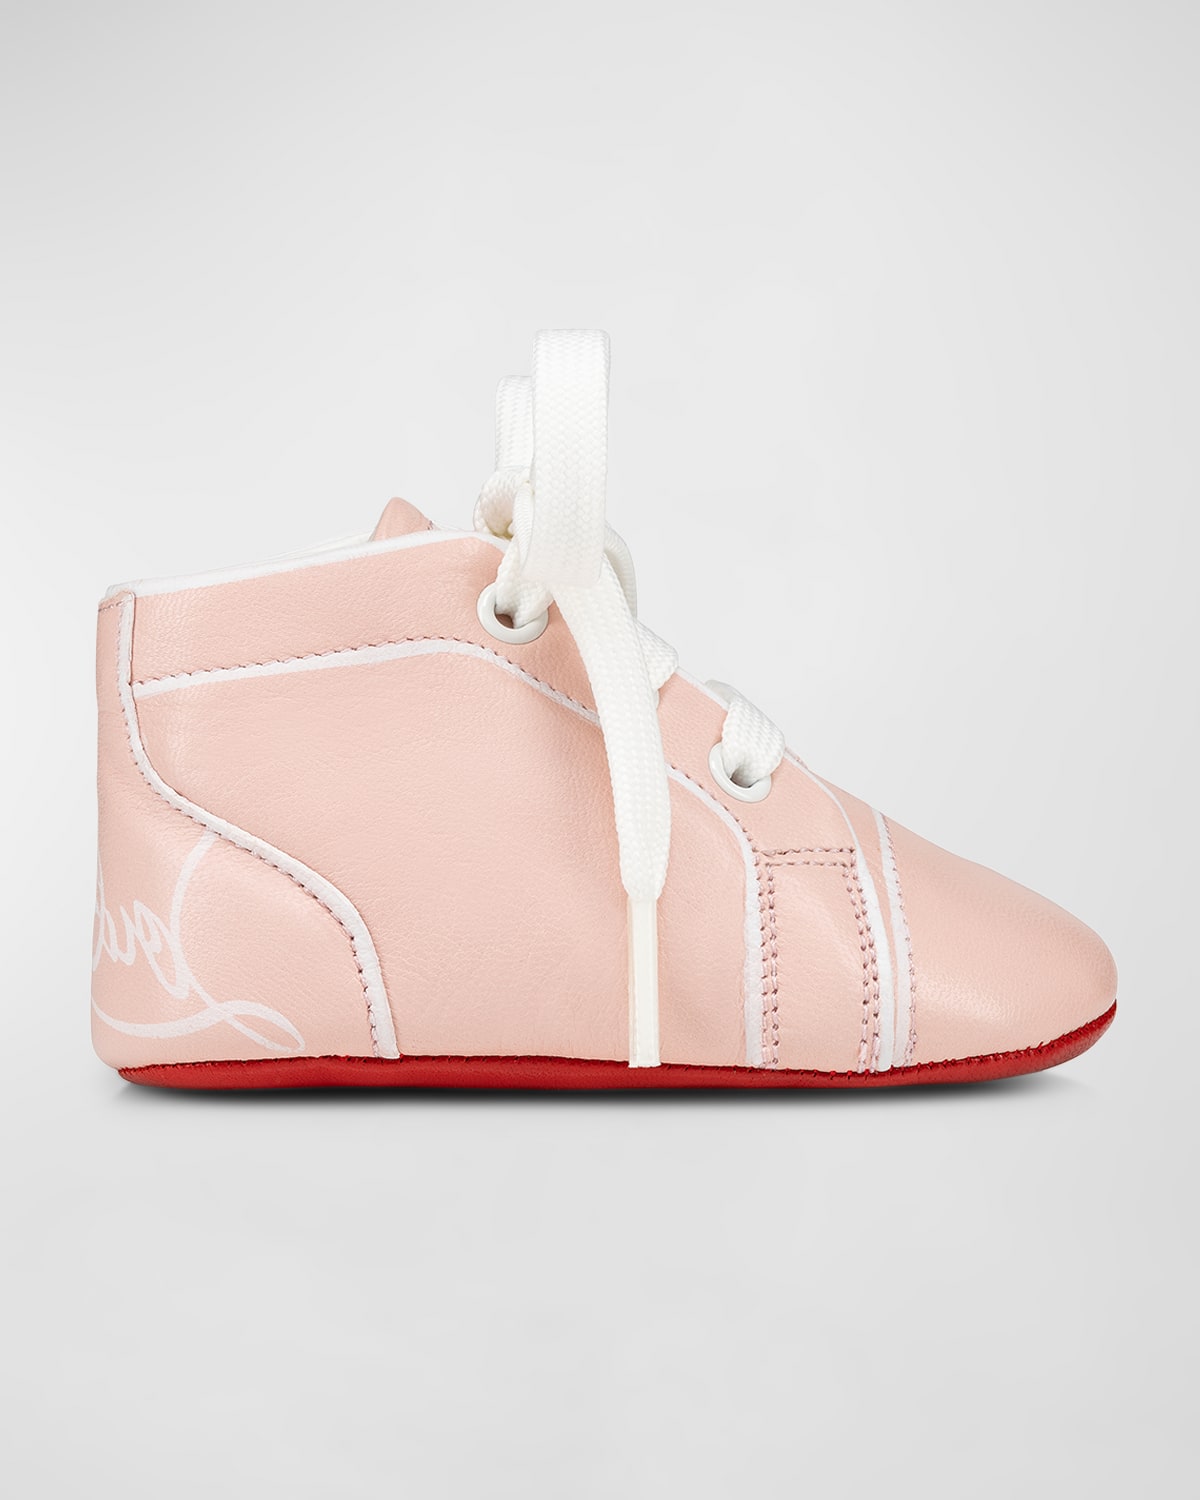 Christian Louboutin Kids' Girl's Funnytopi Suede Sneakers, Baby In Rosy